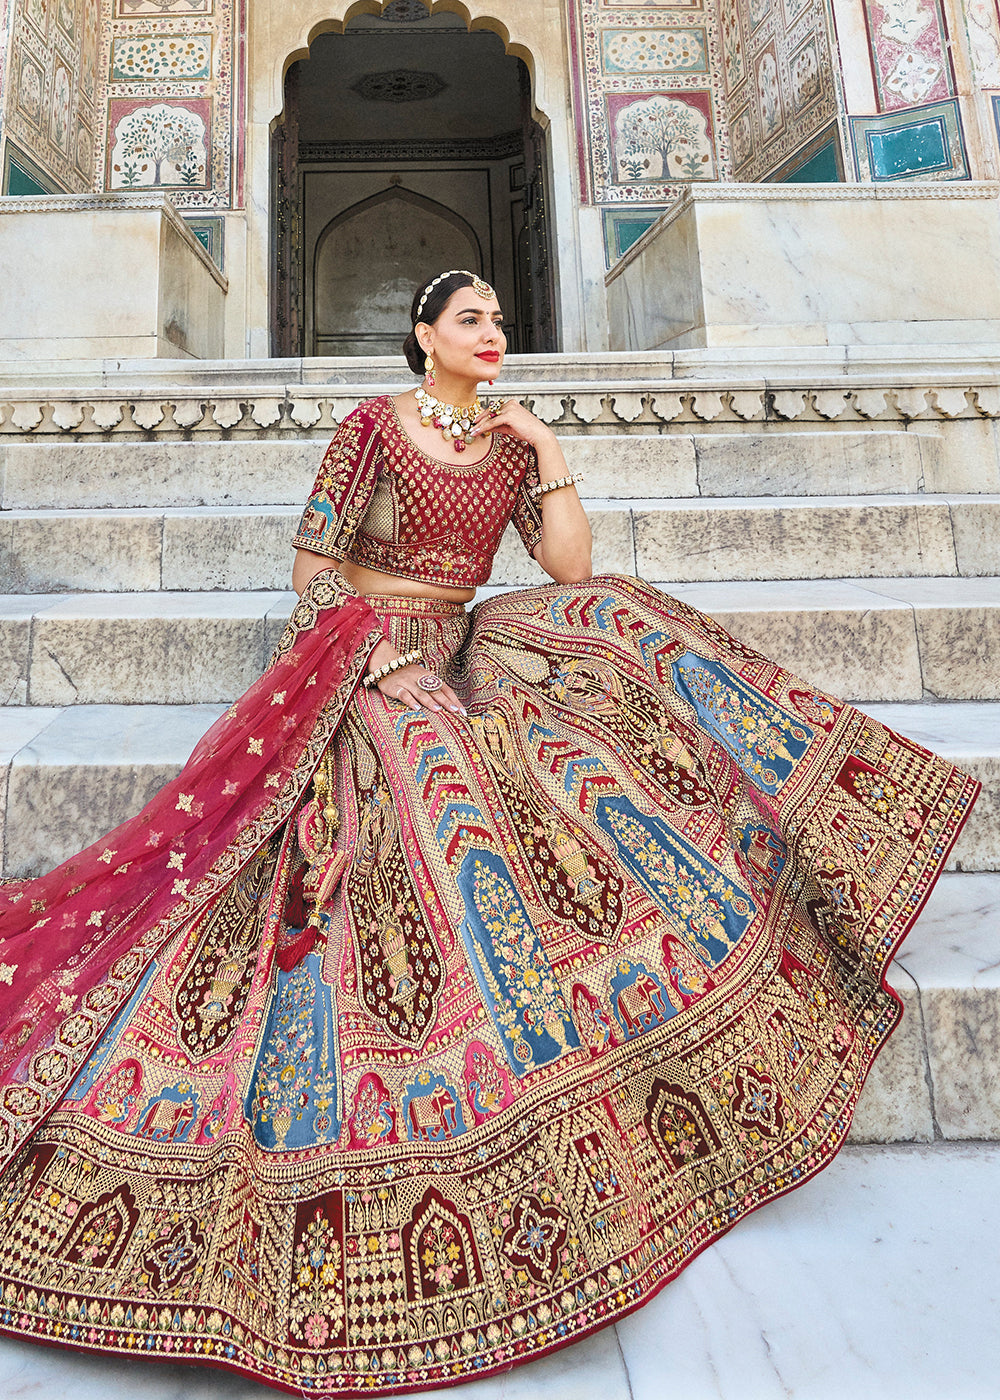 Buy Maroon Lehenga And Crop Top With Hand Embroidered Leaf Motifs And A  Ruffle Dupatta Online - Kalki Fashion